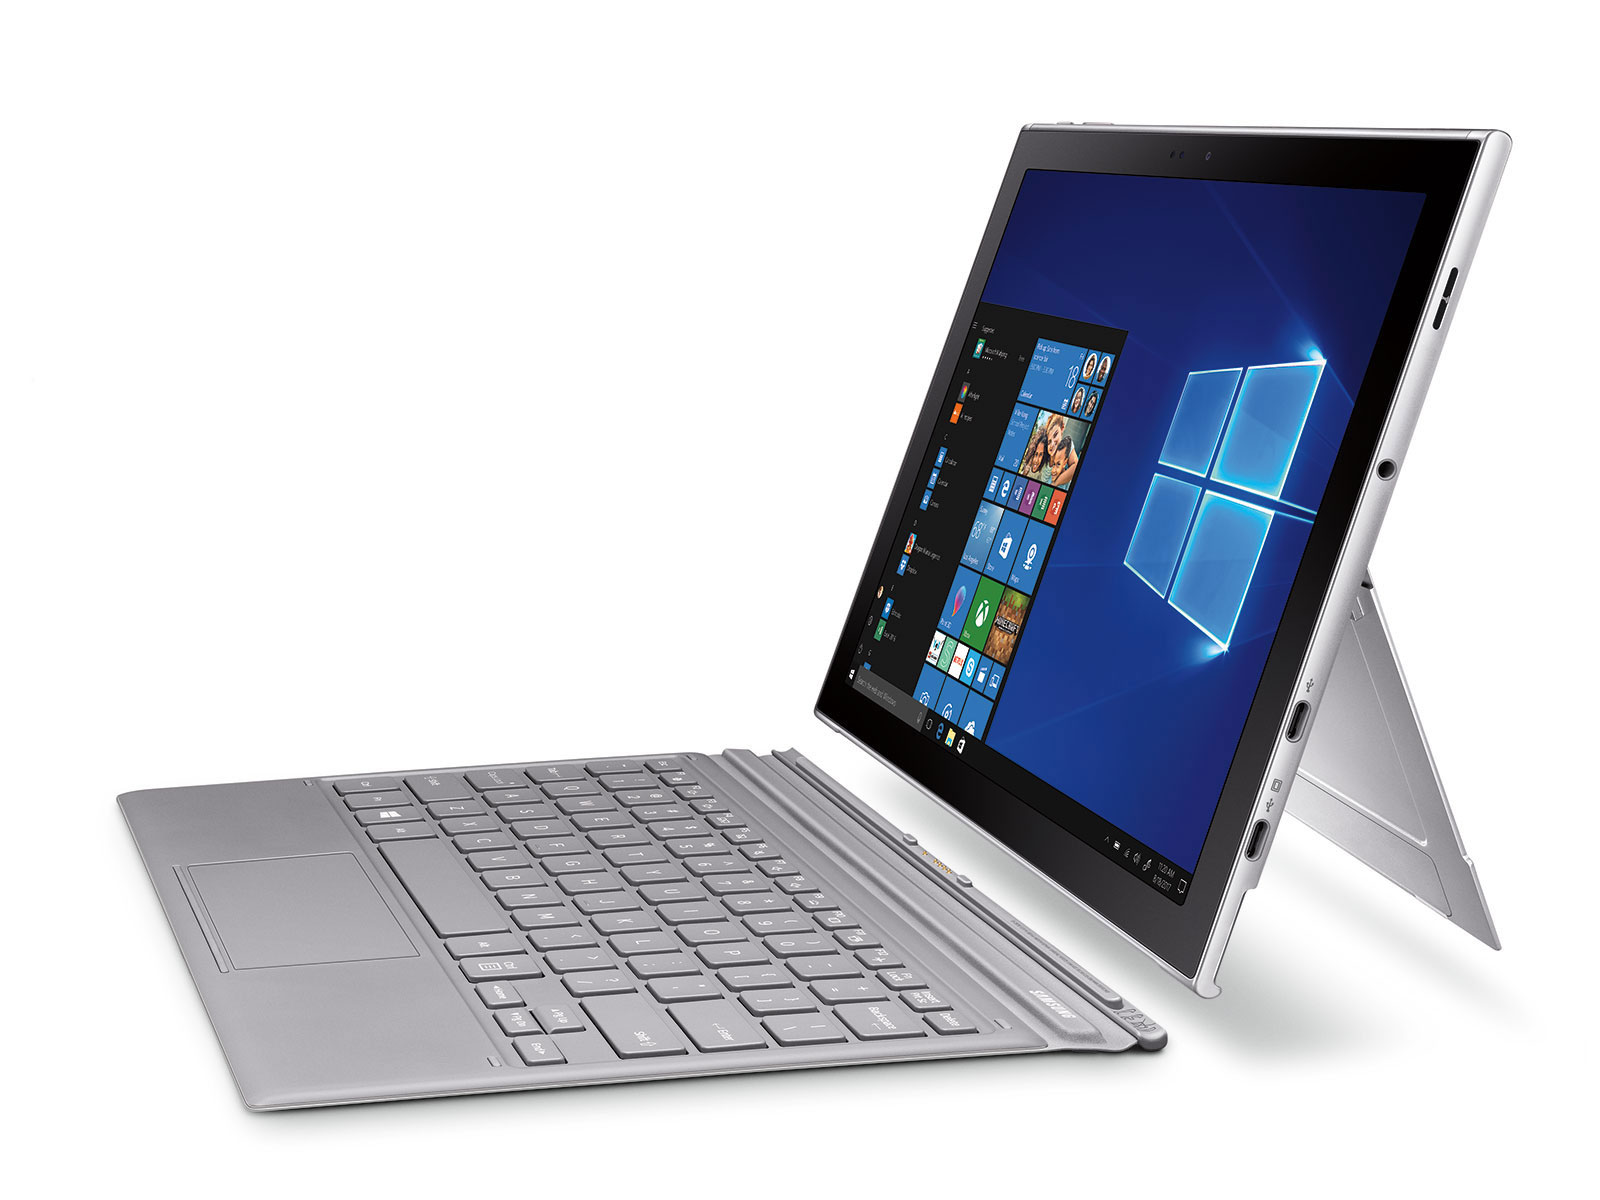 Thumbnail image of Galaxy Book2 12”, 128GB, Silver (AT&T), S Pen and Keyboard included